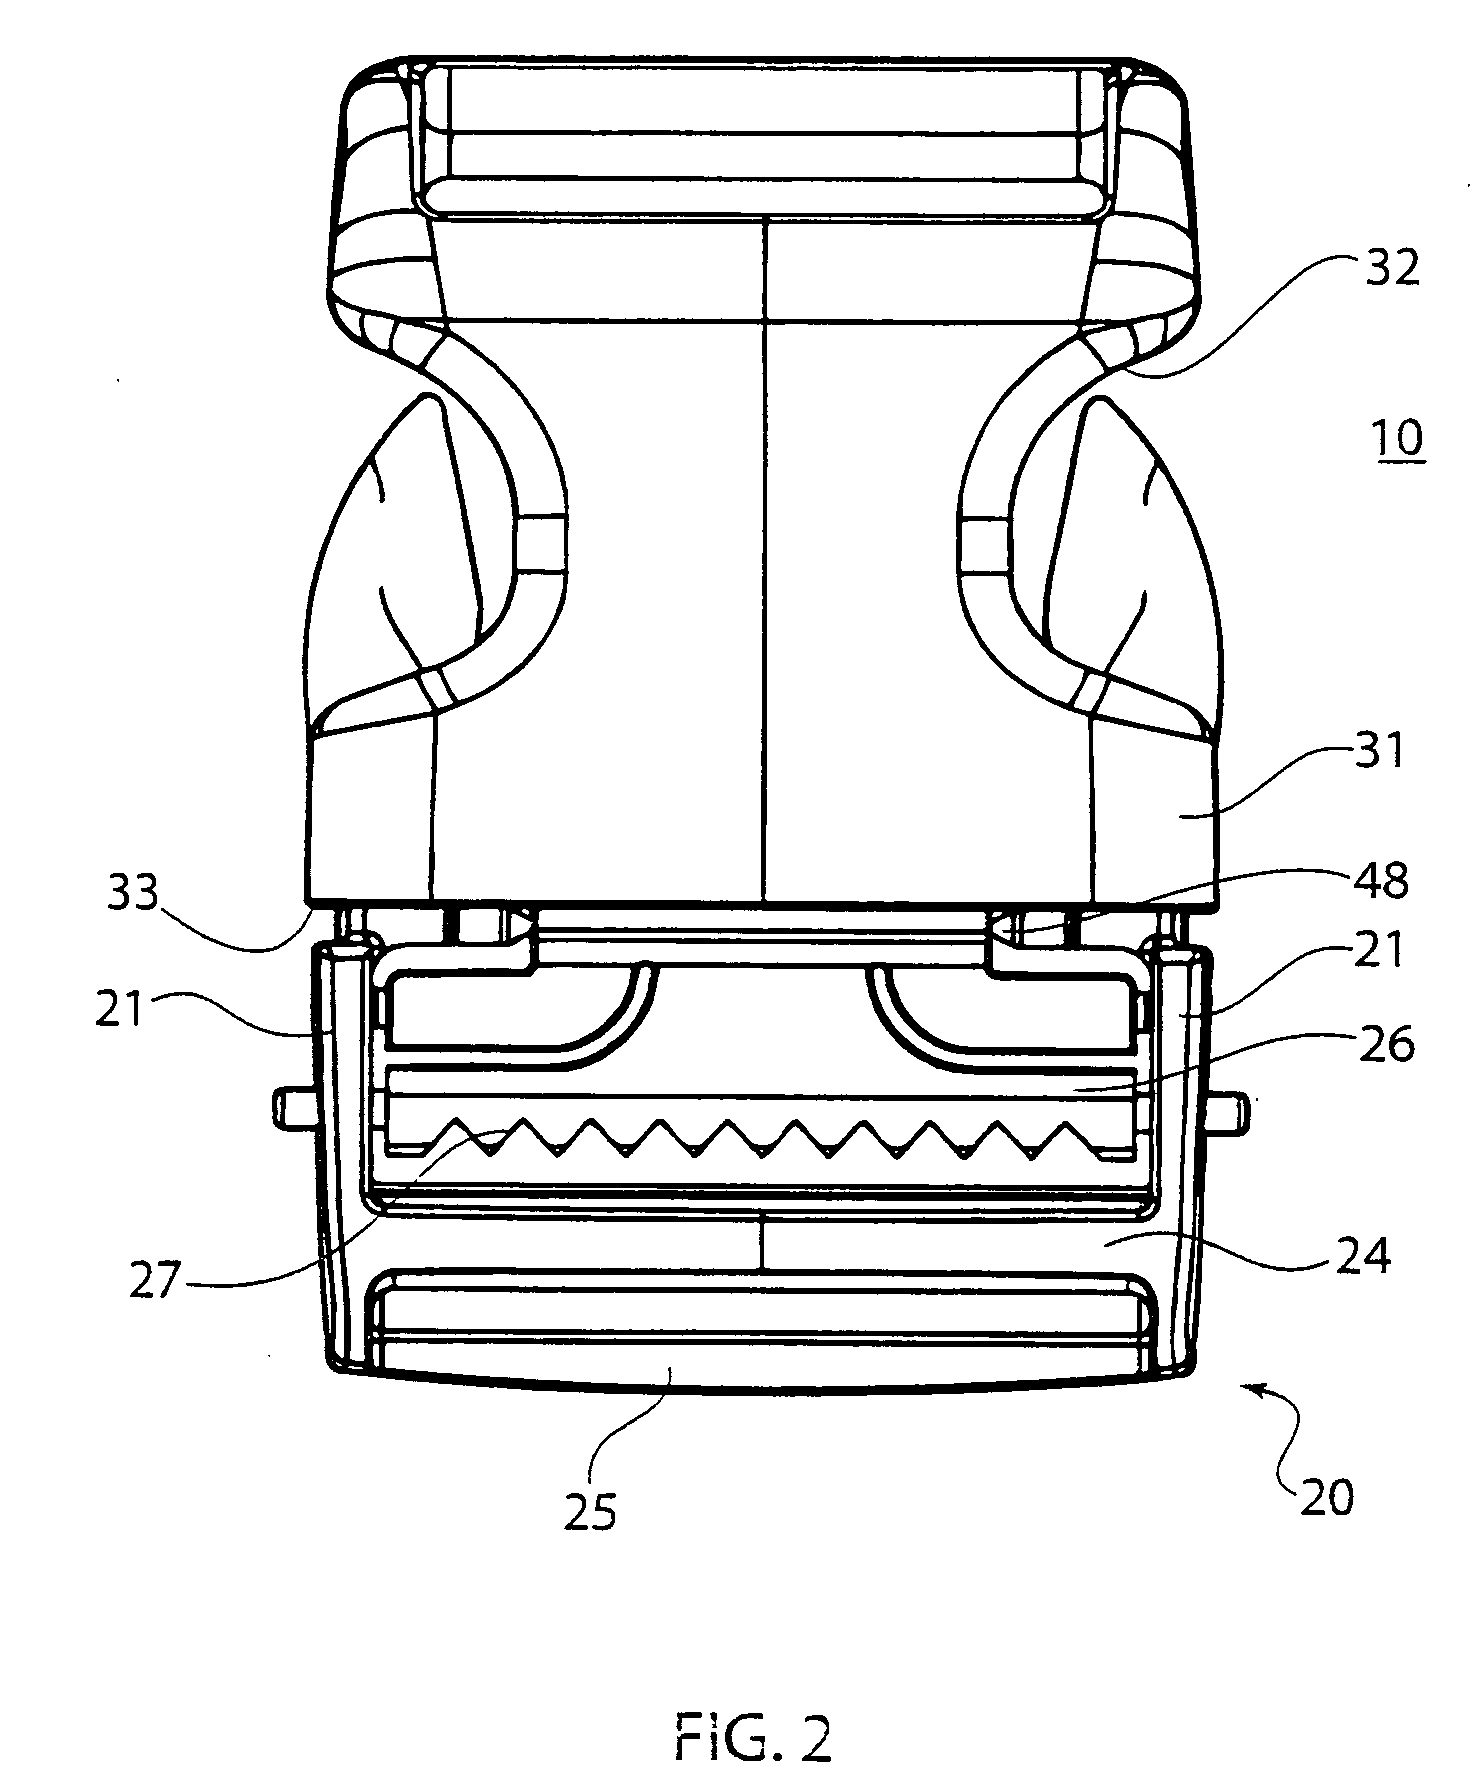 Buckle with strap securing bar